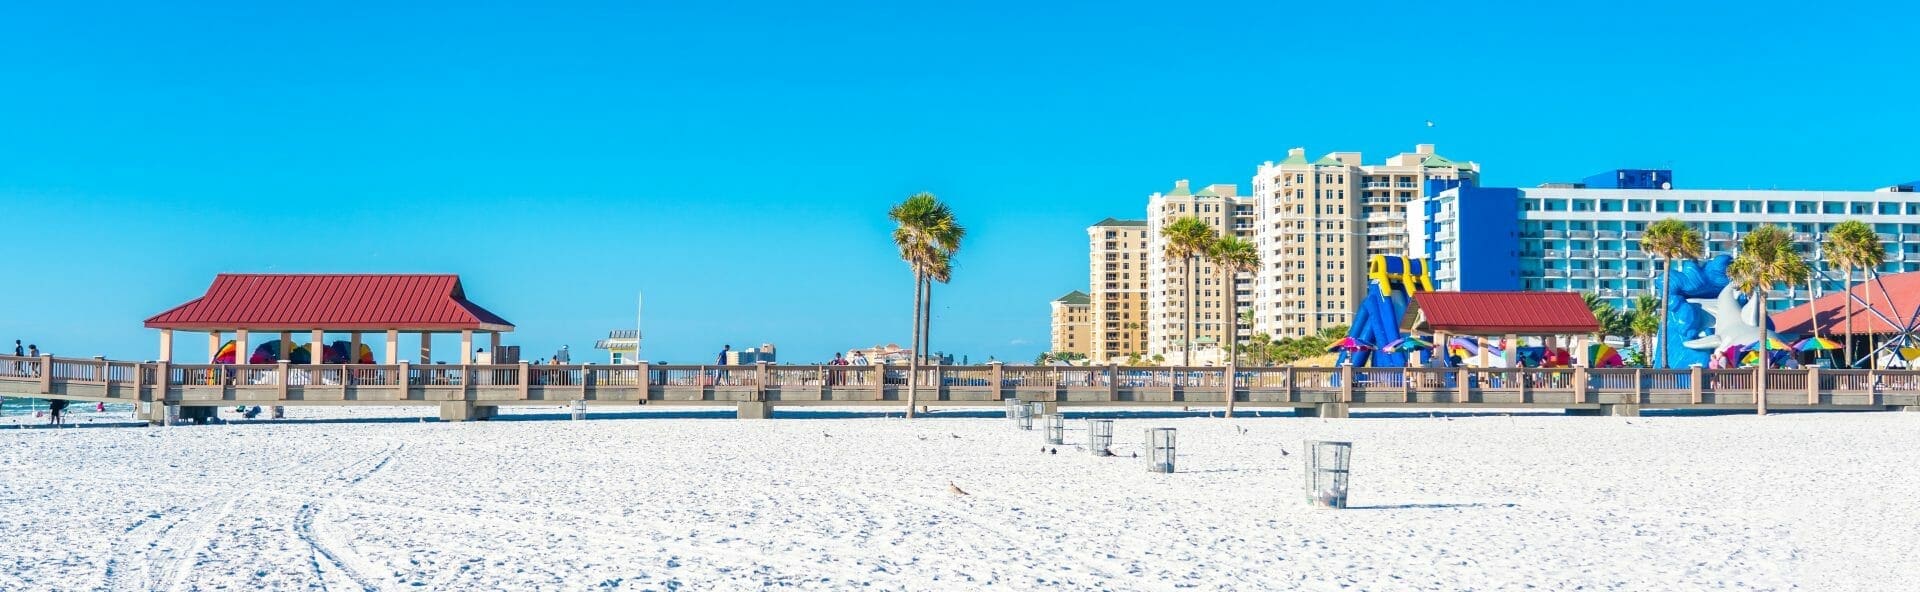 A white sand beach with palm trees and buildings.